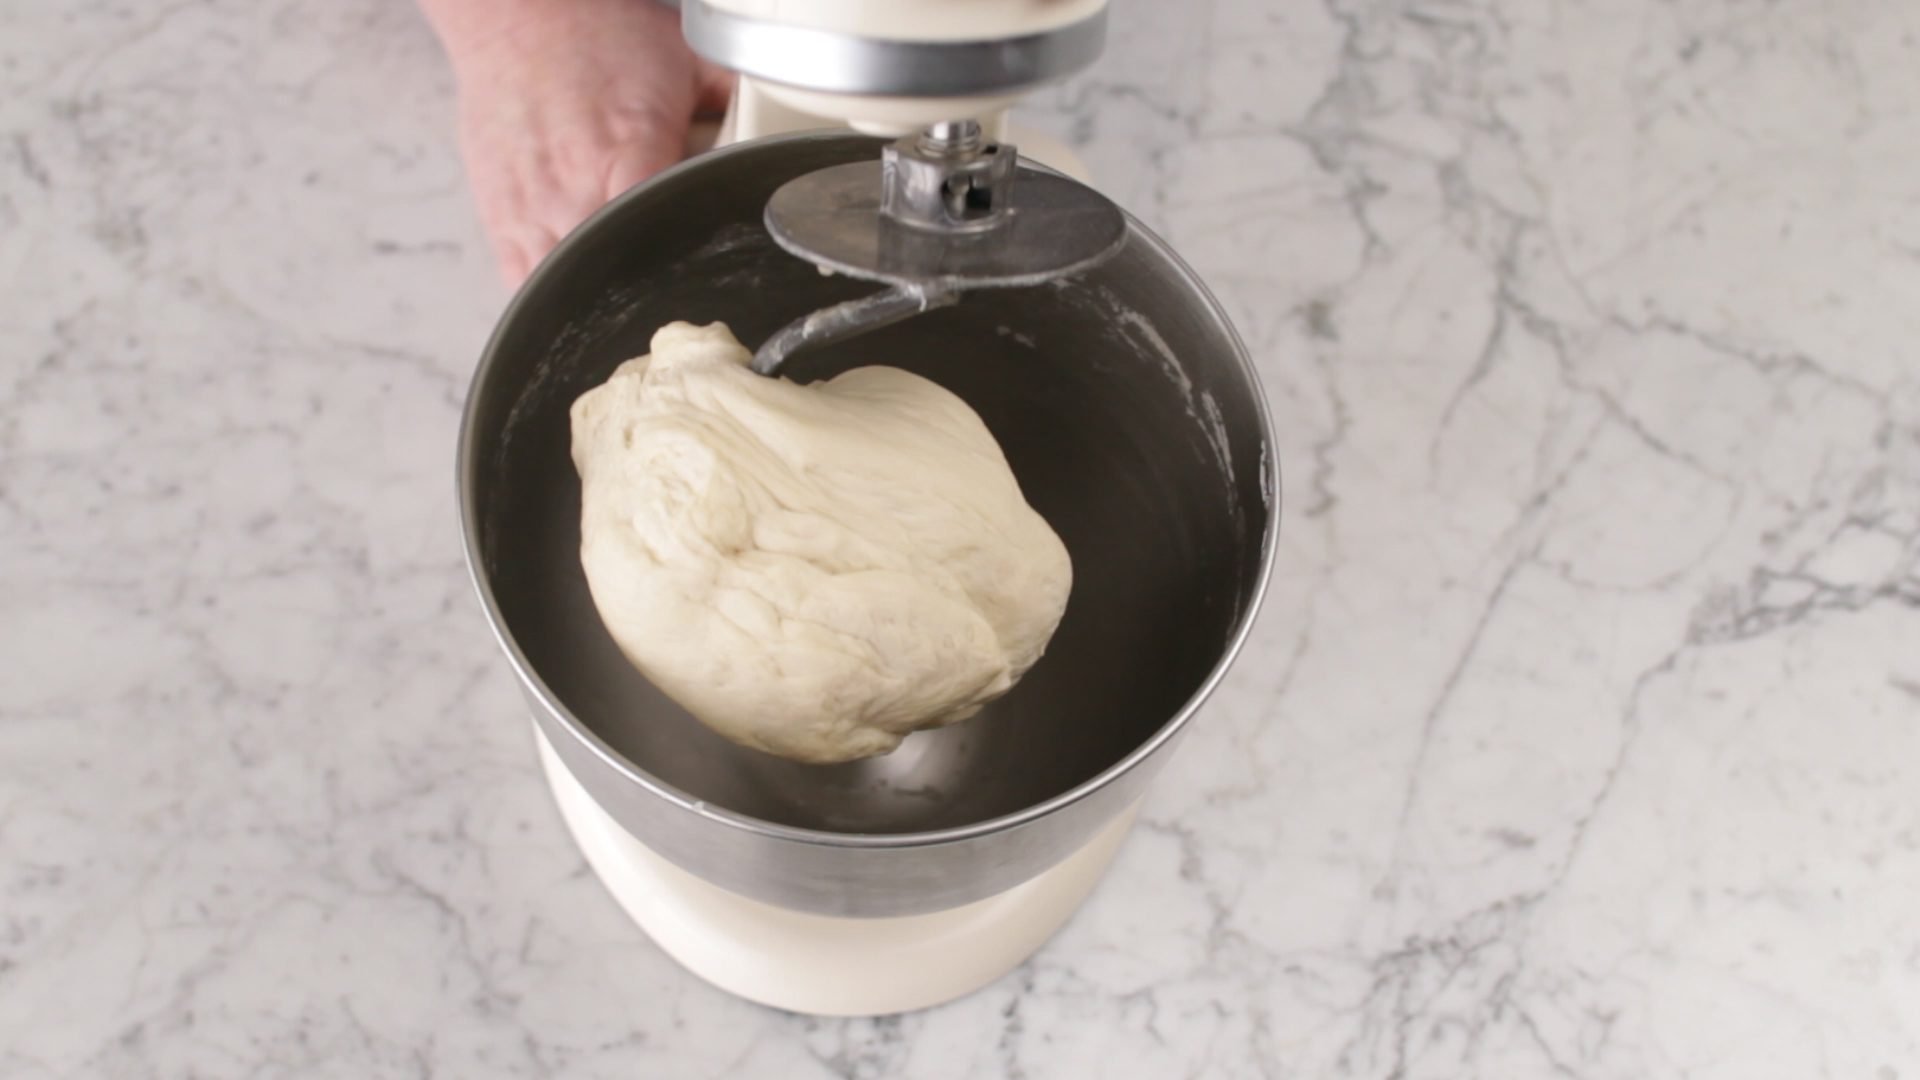 dough hook - Baking and Cooking